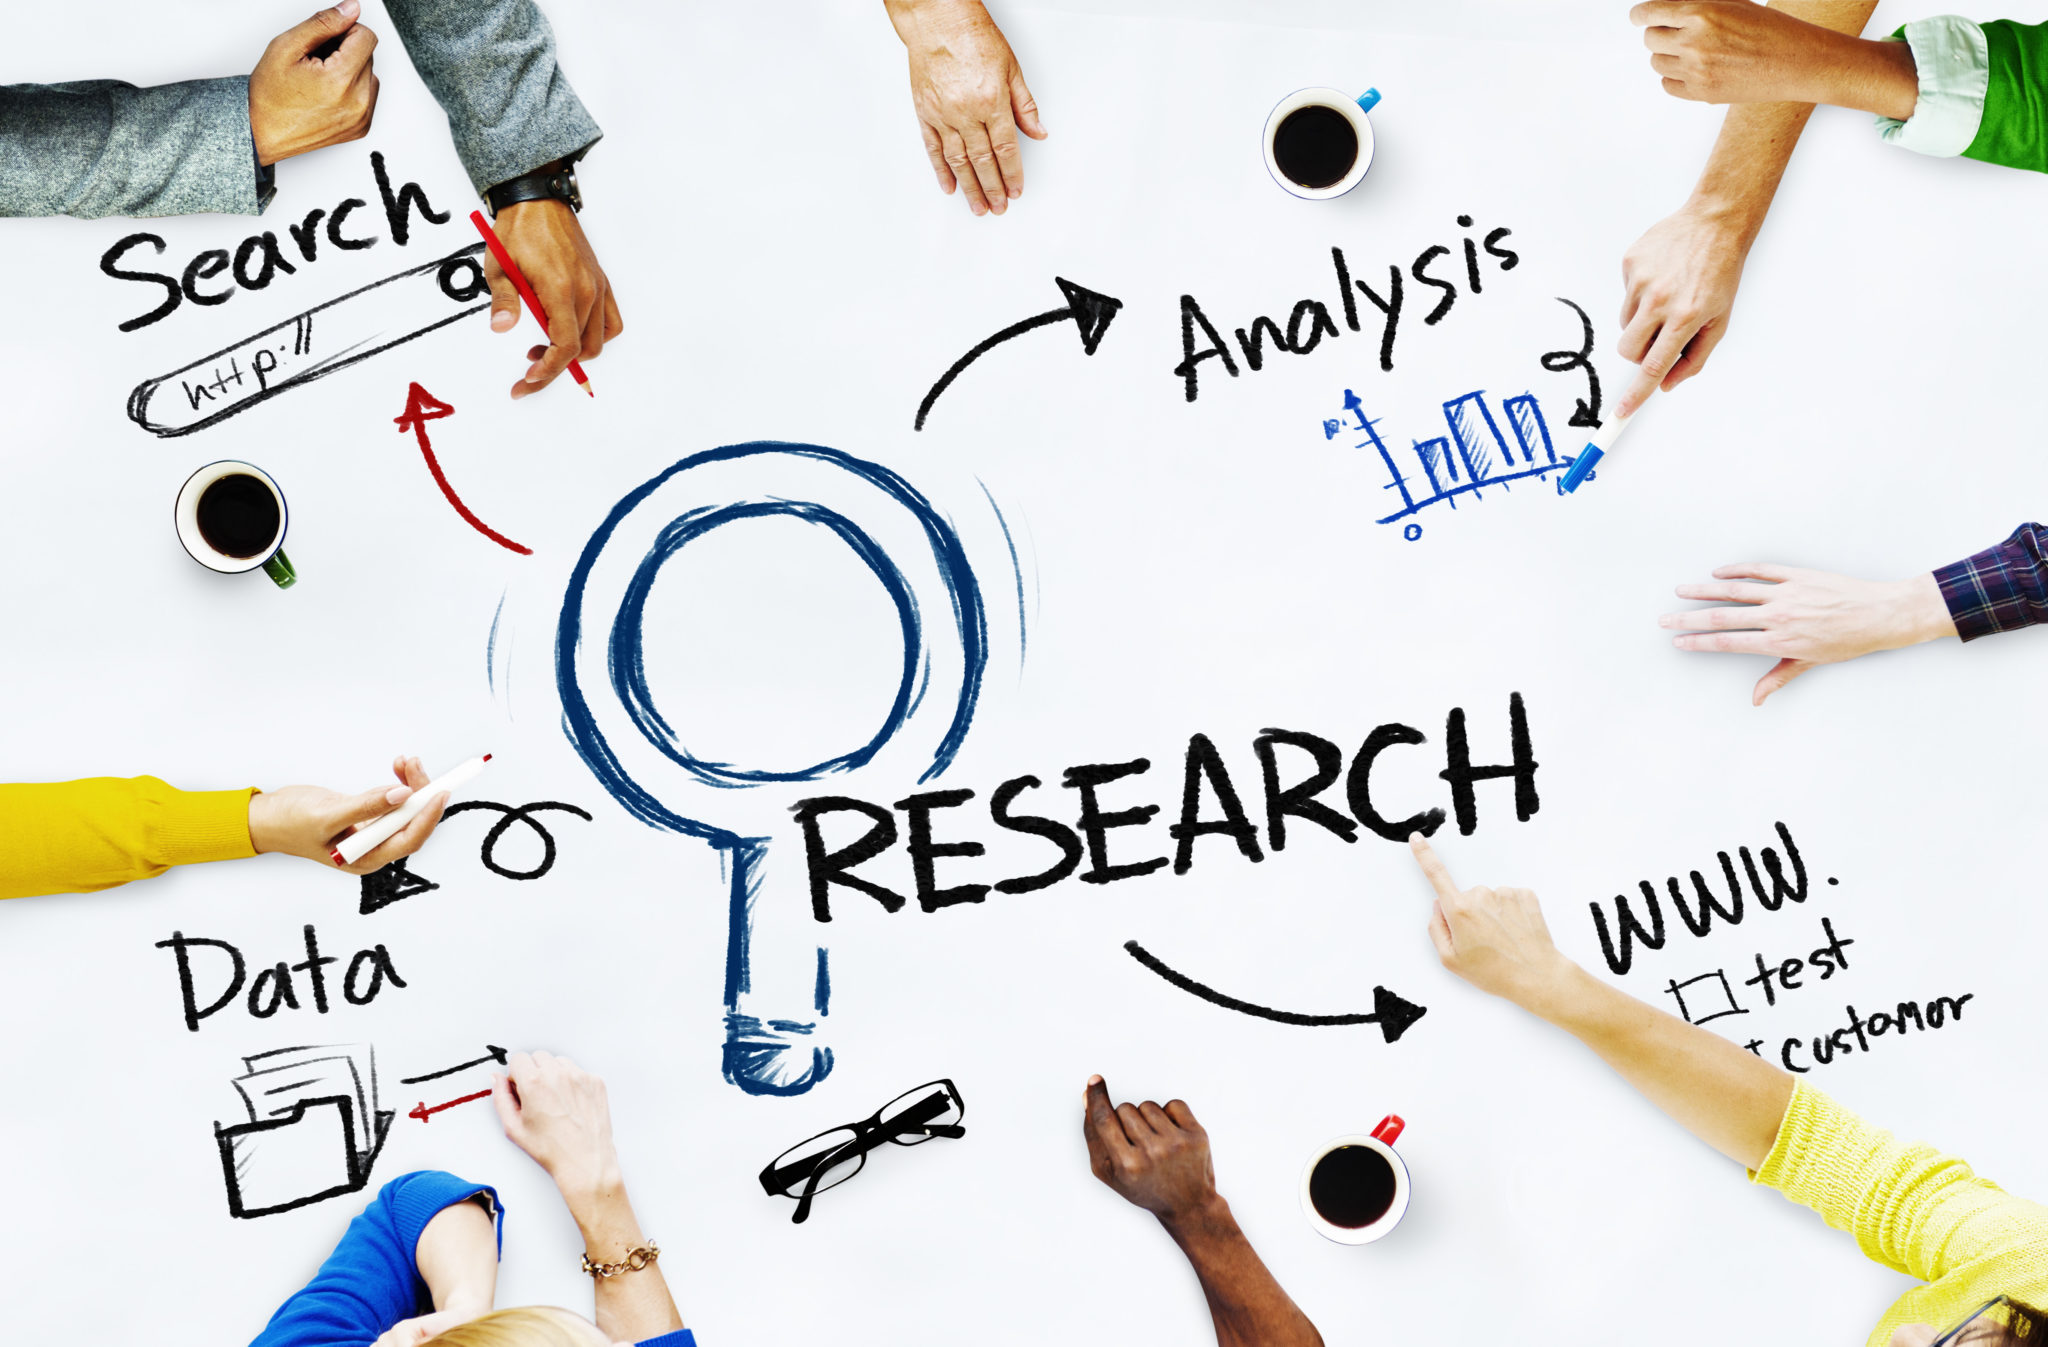 illustration showing the main components of research - data, search, analysis and testing